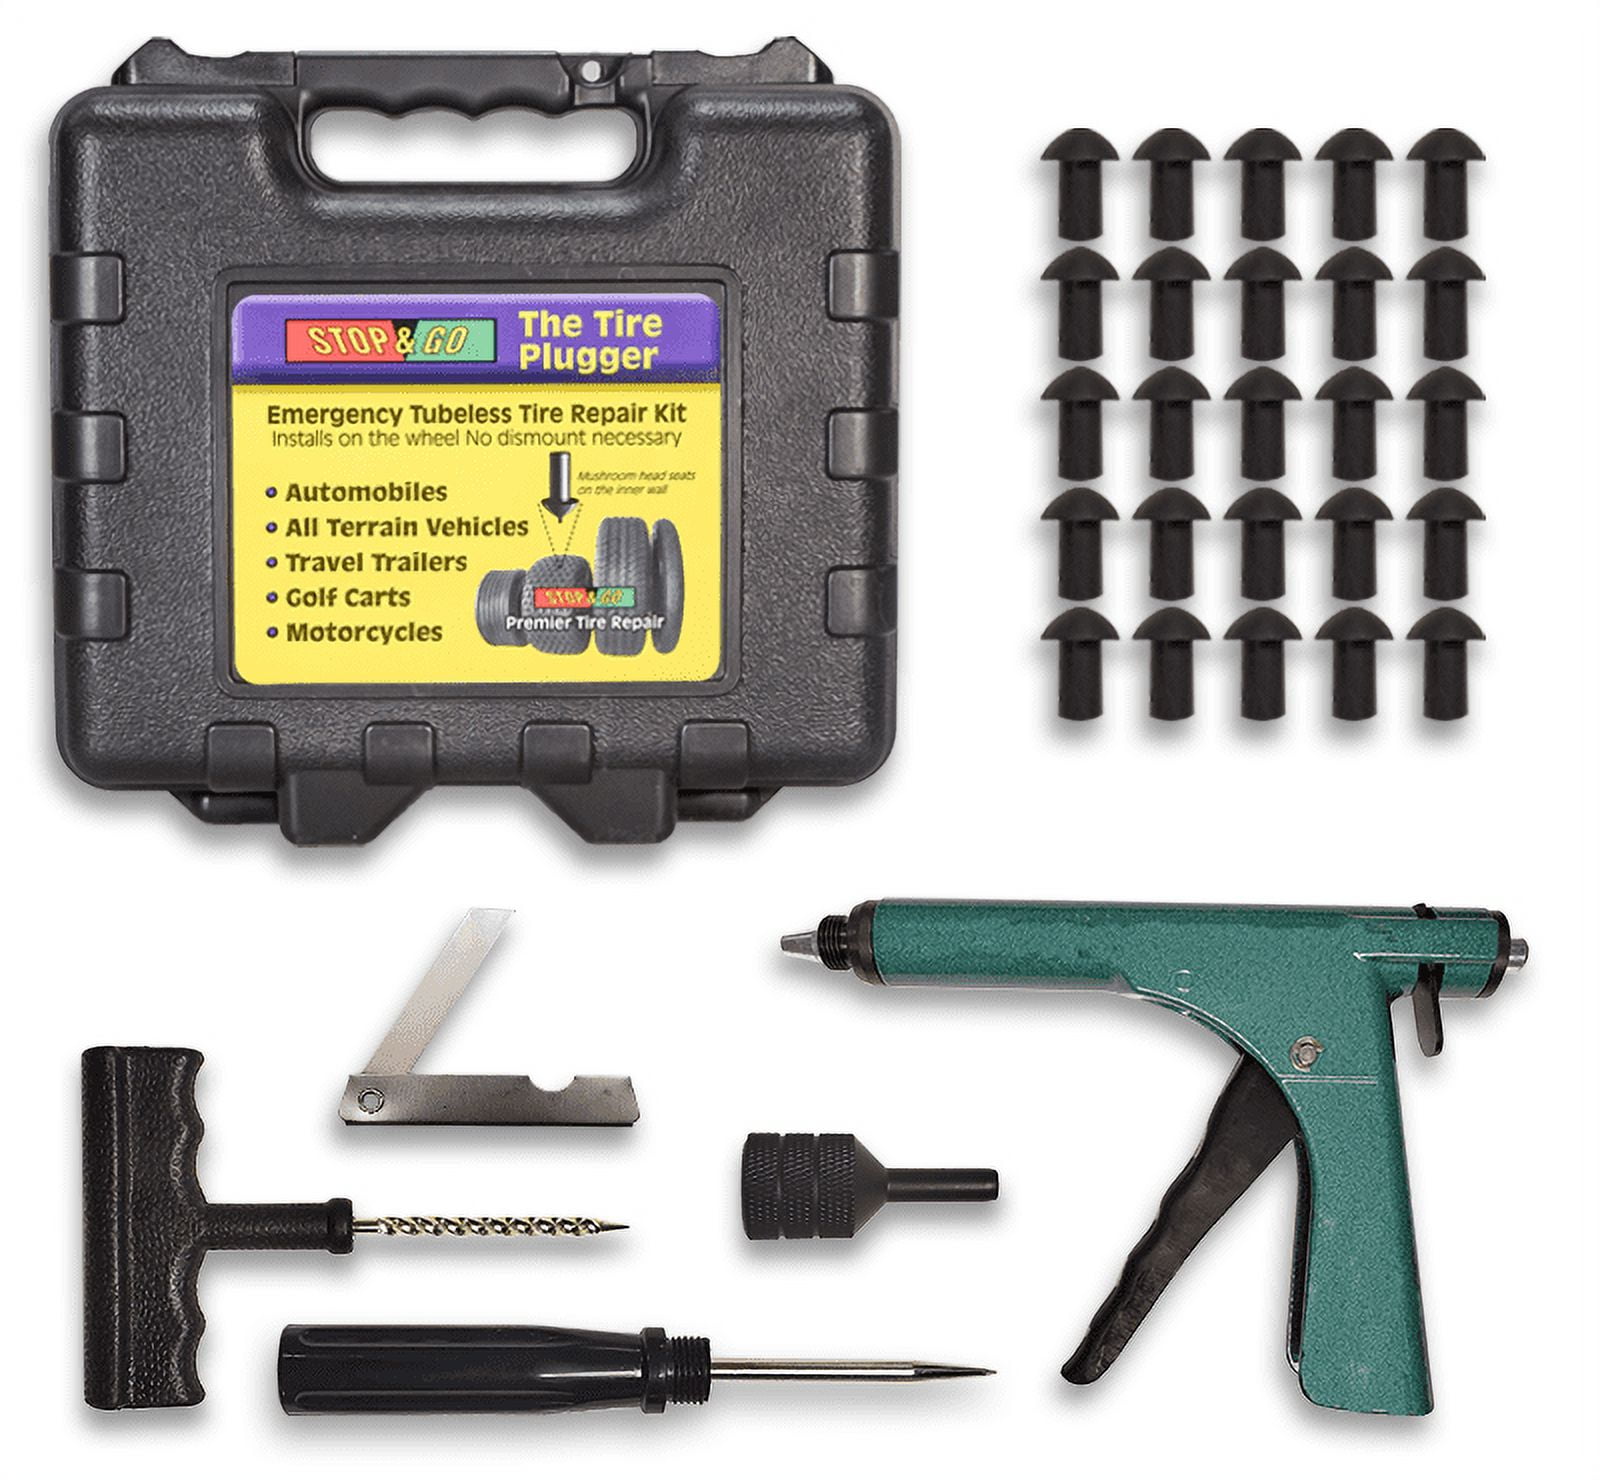 Stop & Go 1085 30 Piece Deluxe Tubeless Tire Plugger Repair Kit Punctures  and Flats on Car, Motorcycle, ATV, Jeep, Truck, & Tractor (25 Mushroom  Plugs) 